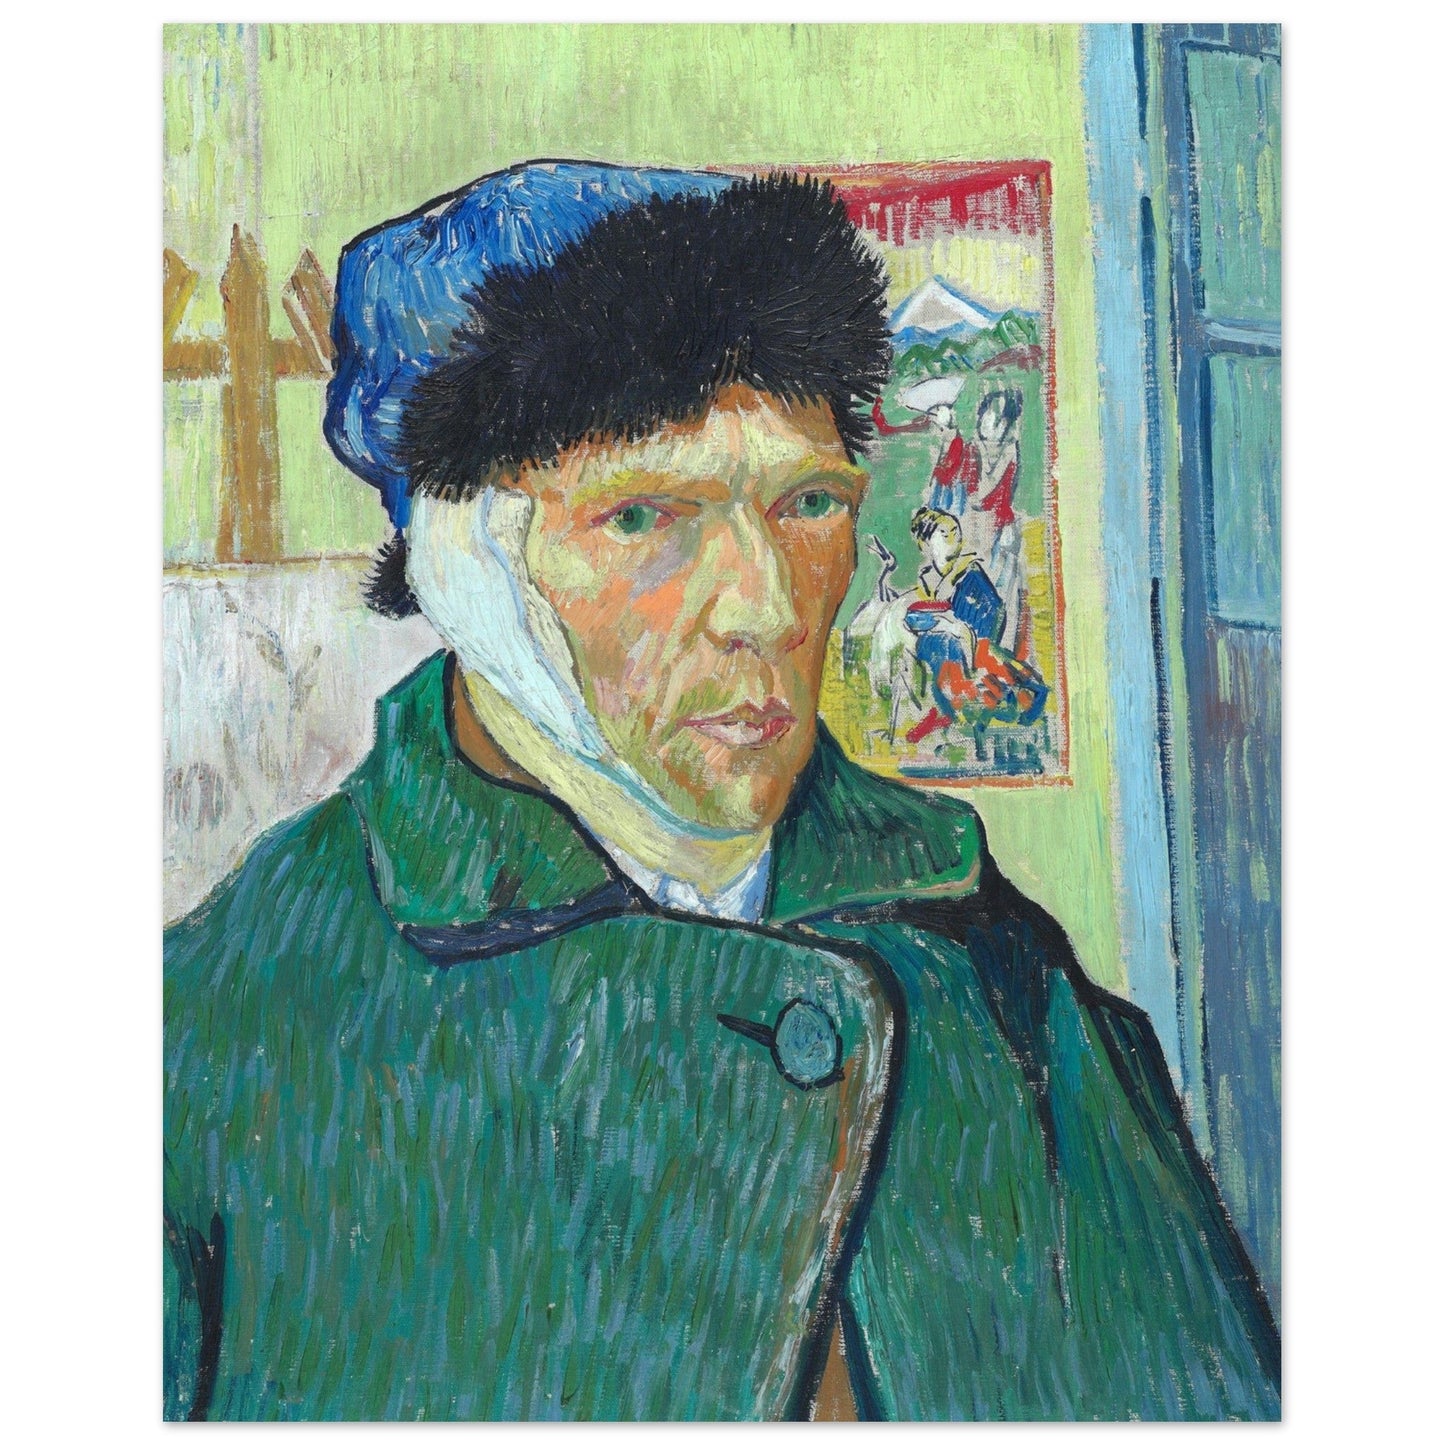 A high-quality "Self-Portrait with Bandaged Ear" wall art featuring a man with a bandage on his head.